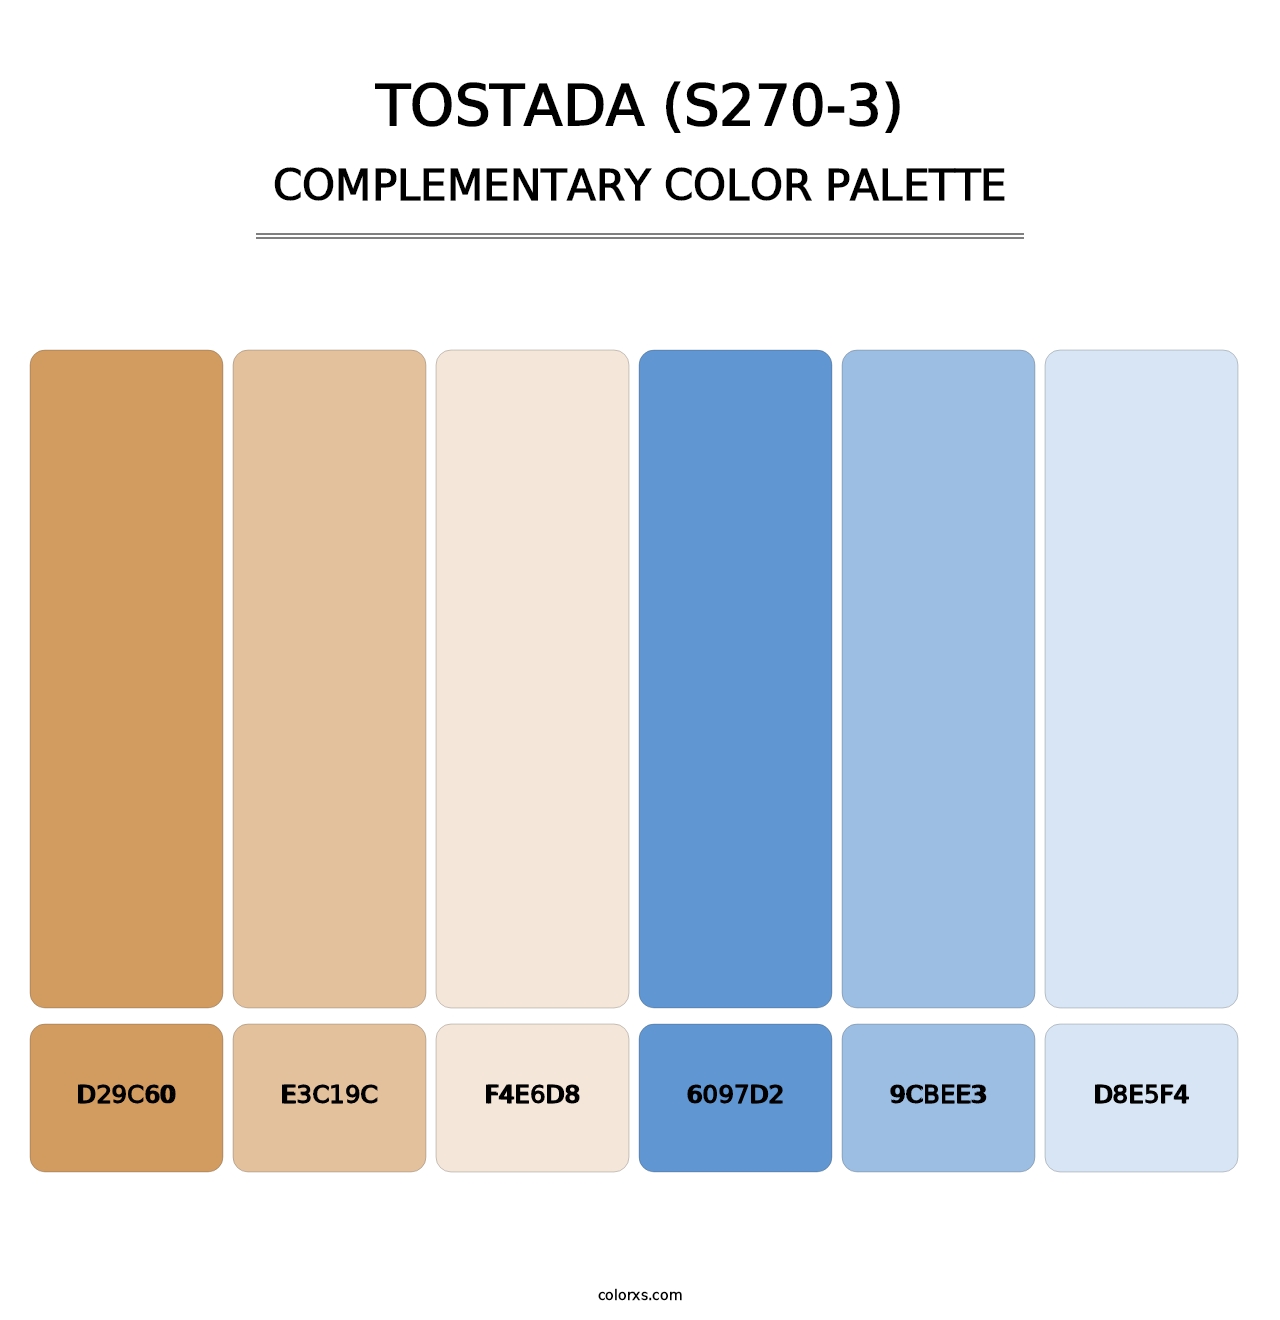 Tostada (S270-3) - Complementary Color Palette